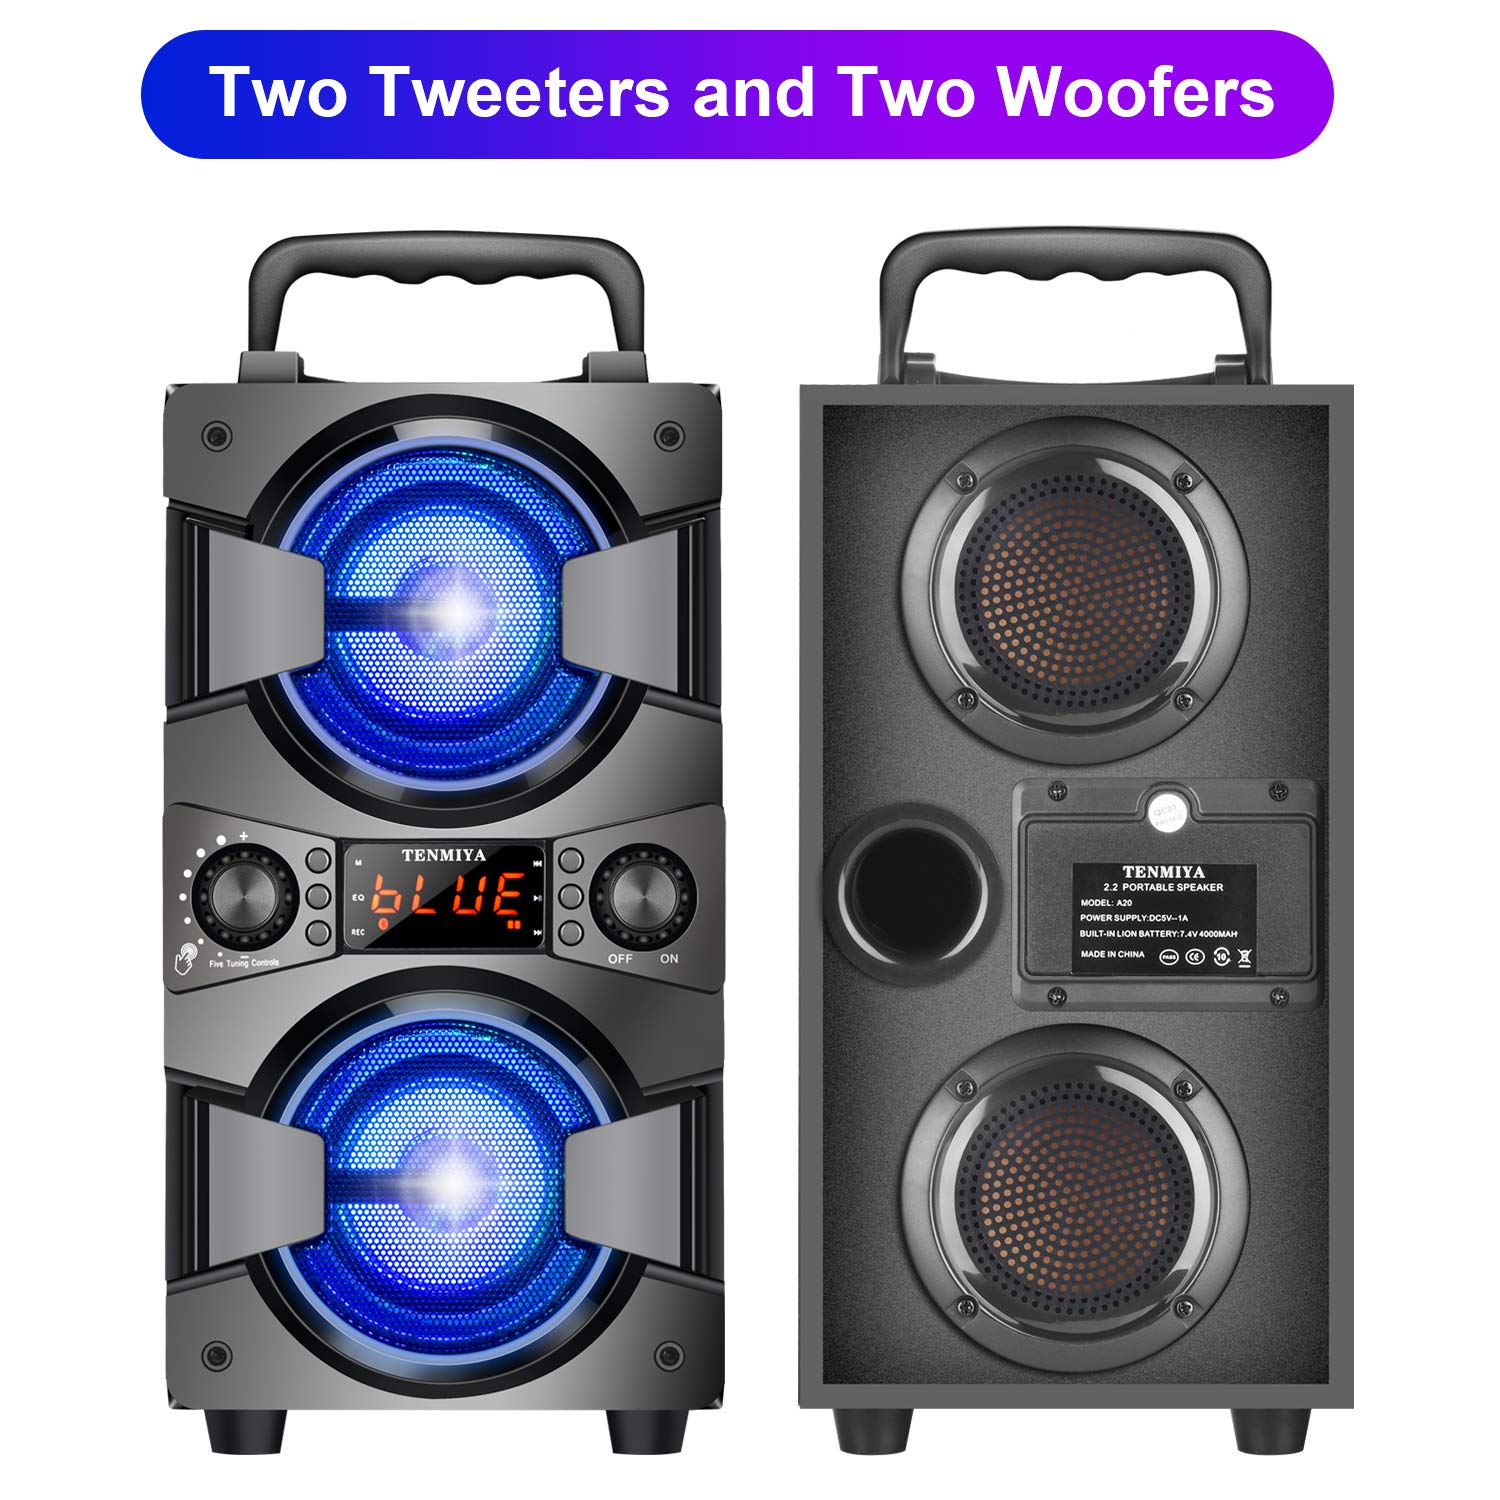 Bluetooth Speakers, 60W(80W Peak) Portable Wireless Speaker with Lights, Microphone, Double Subwoofer Heavy Bass, FM Radio, Remote, Rich Stereo, Loud Speaker for Home Outdoor Party